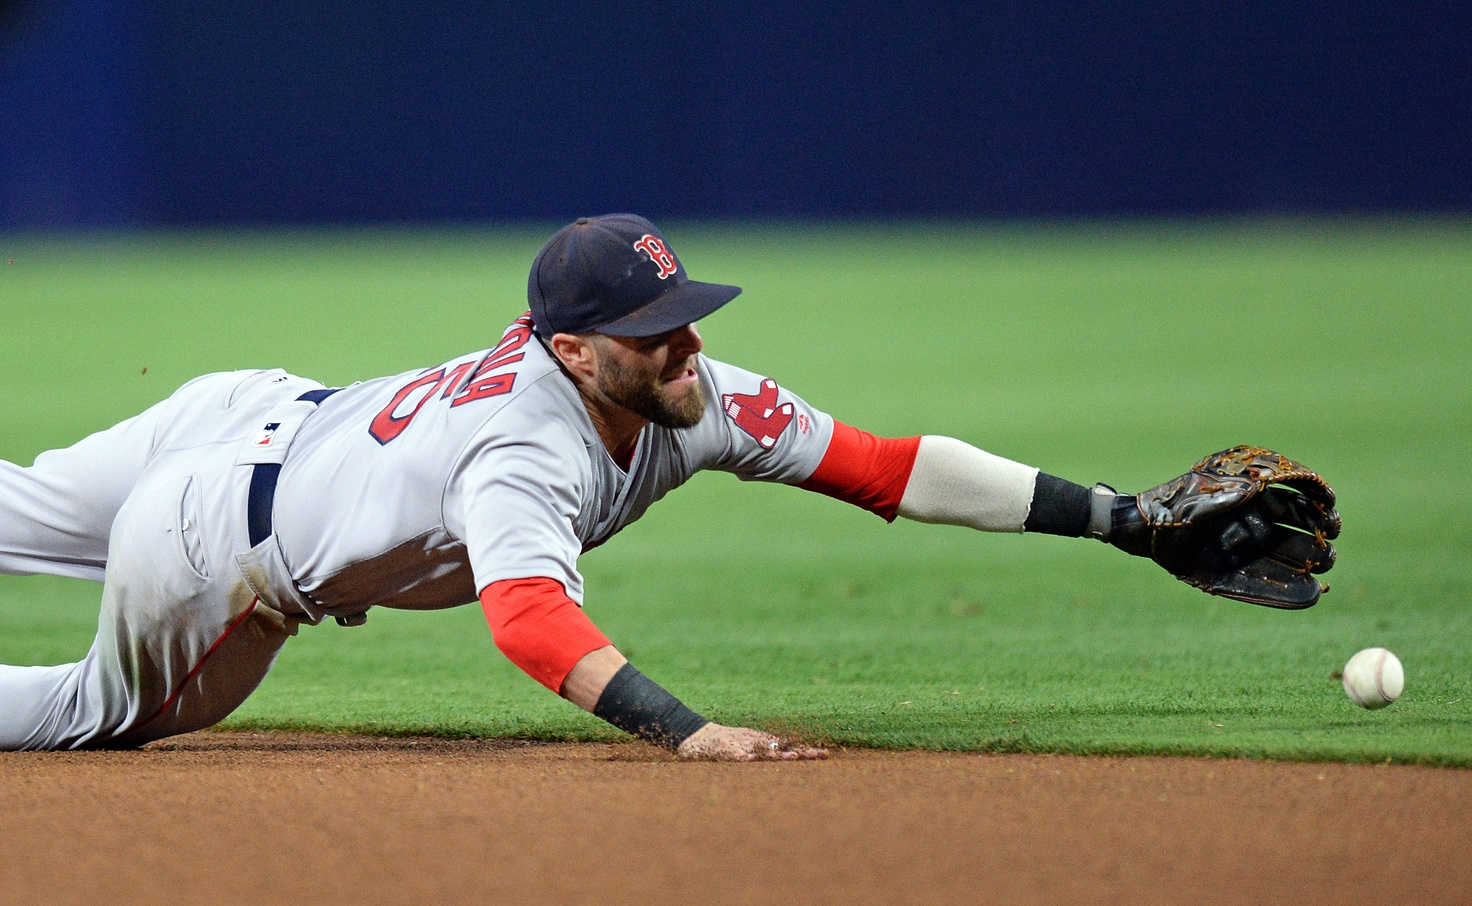 10 thoughts on Pedroia, retirement